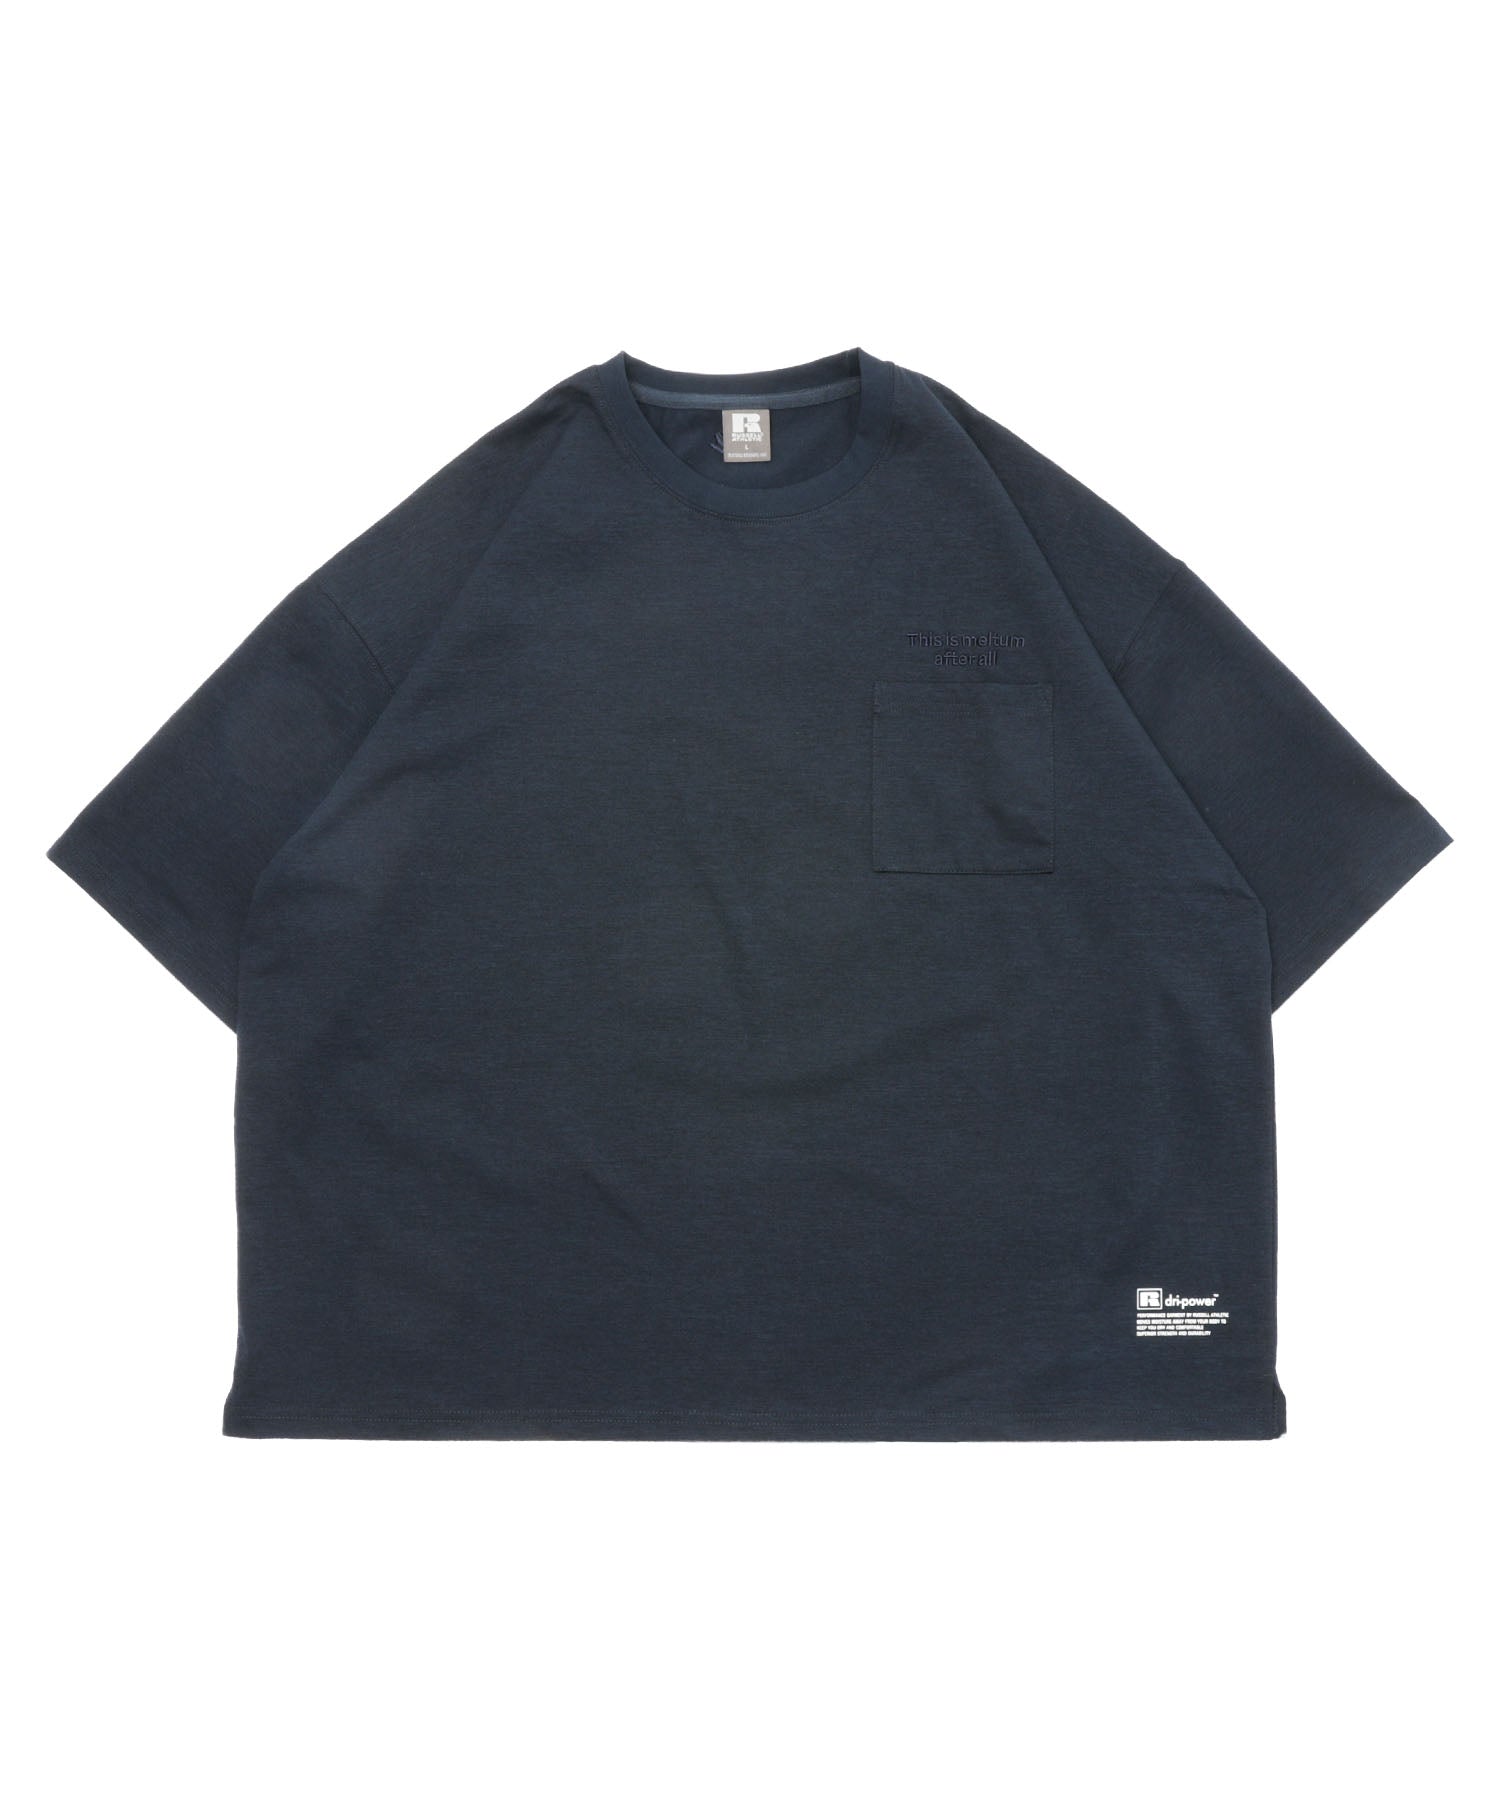 【4.24 WED 12:00- IN STOCK】meltum × RUSSELL ATHLETIC DRY POWER BIG T-SHIRT S/S